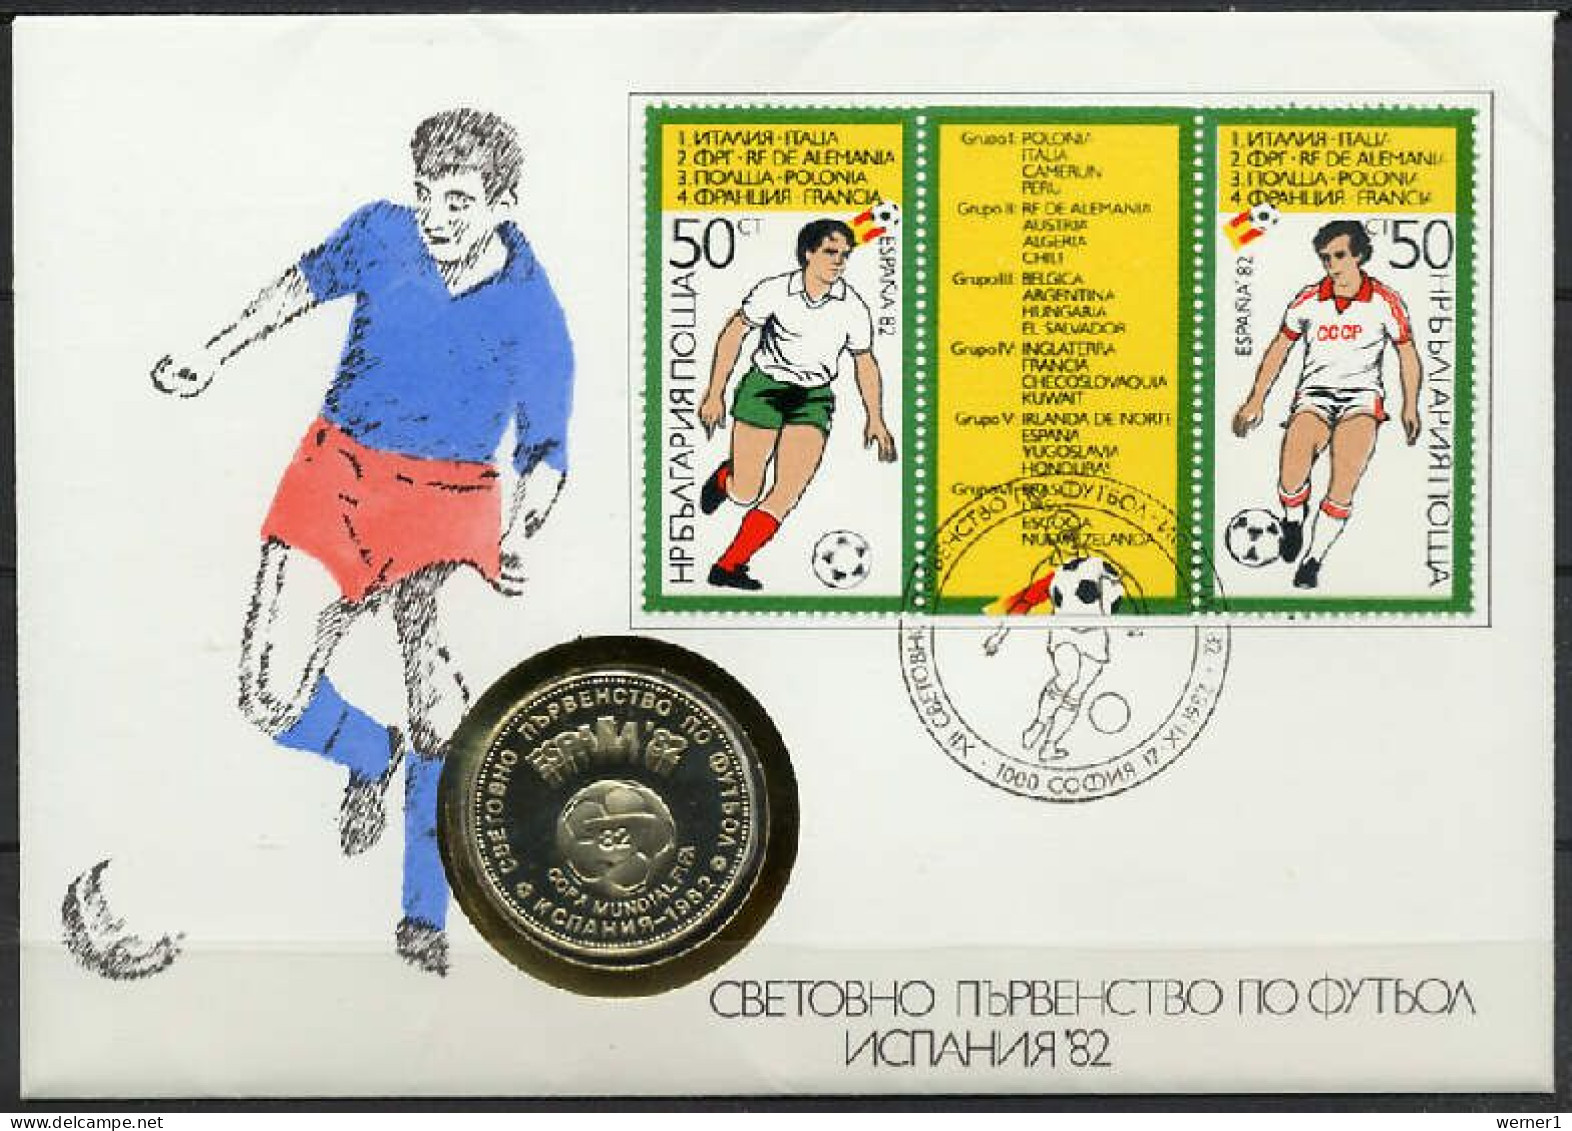 Bulgaria 1982 Football Soccer World Cup Numismatic Cover With 2 Lewa Coin And 2 Stamps - 1982 – Espagne